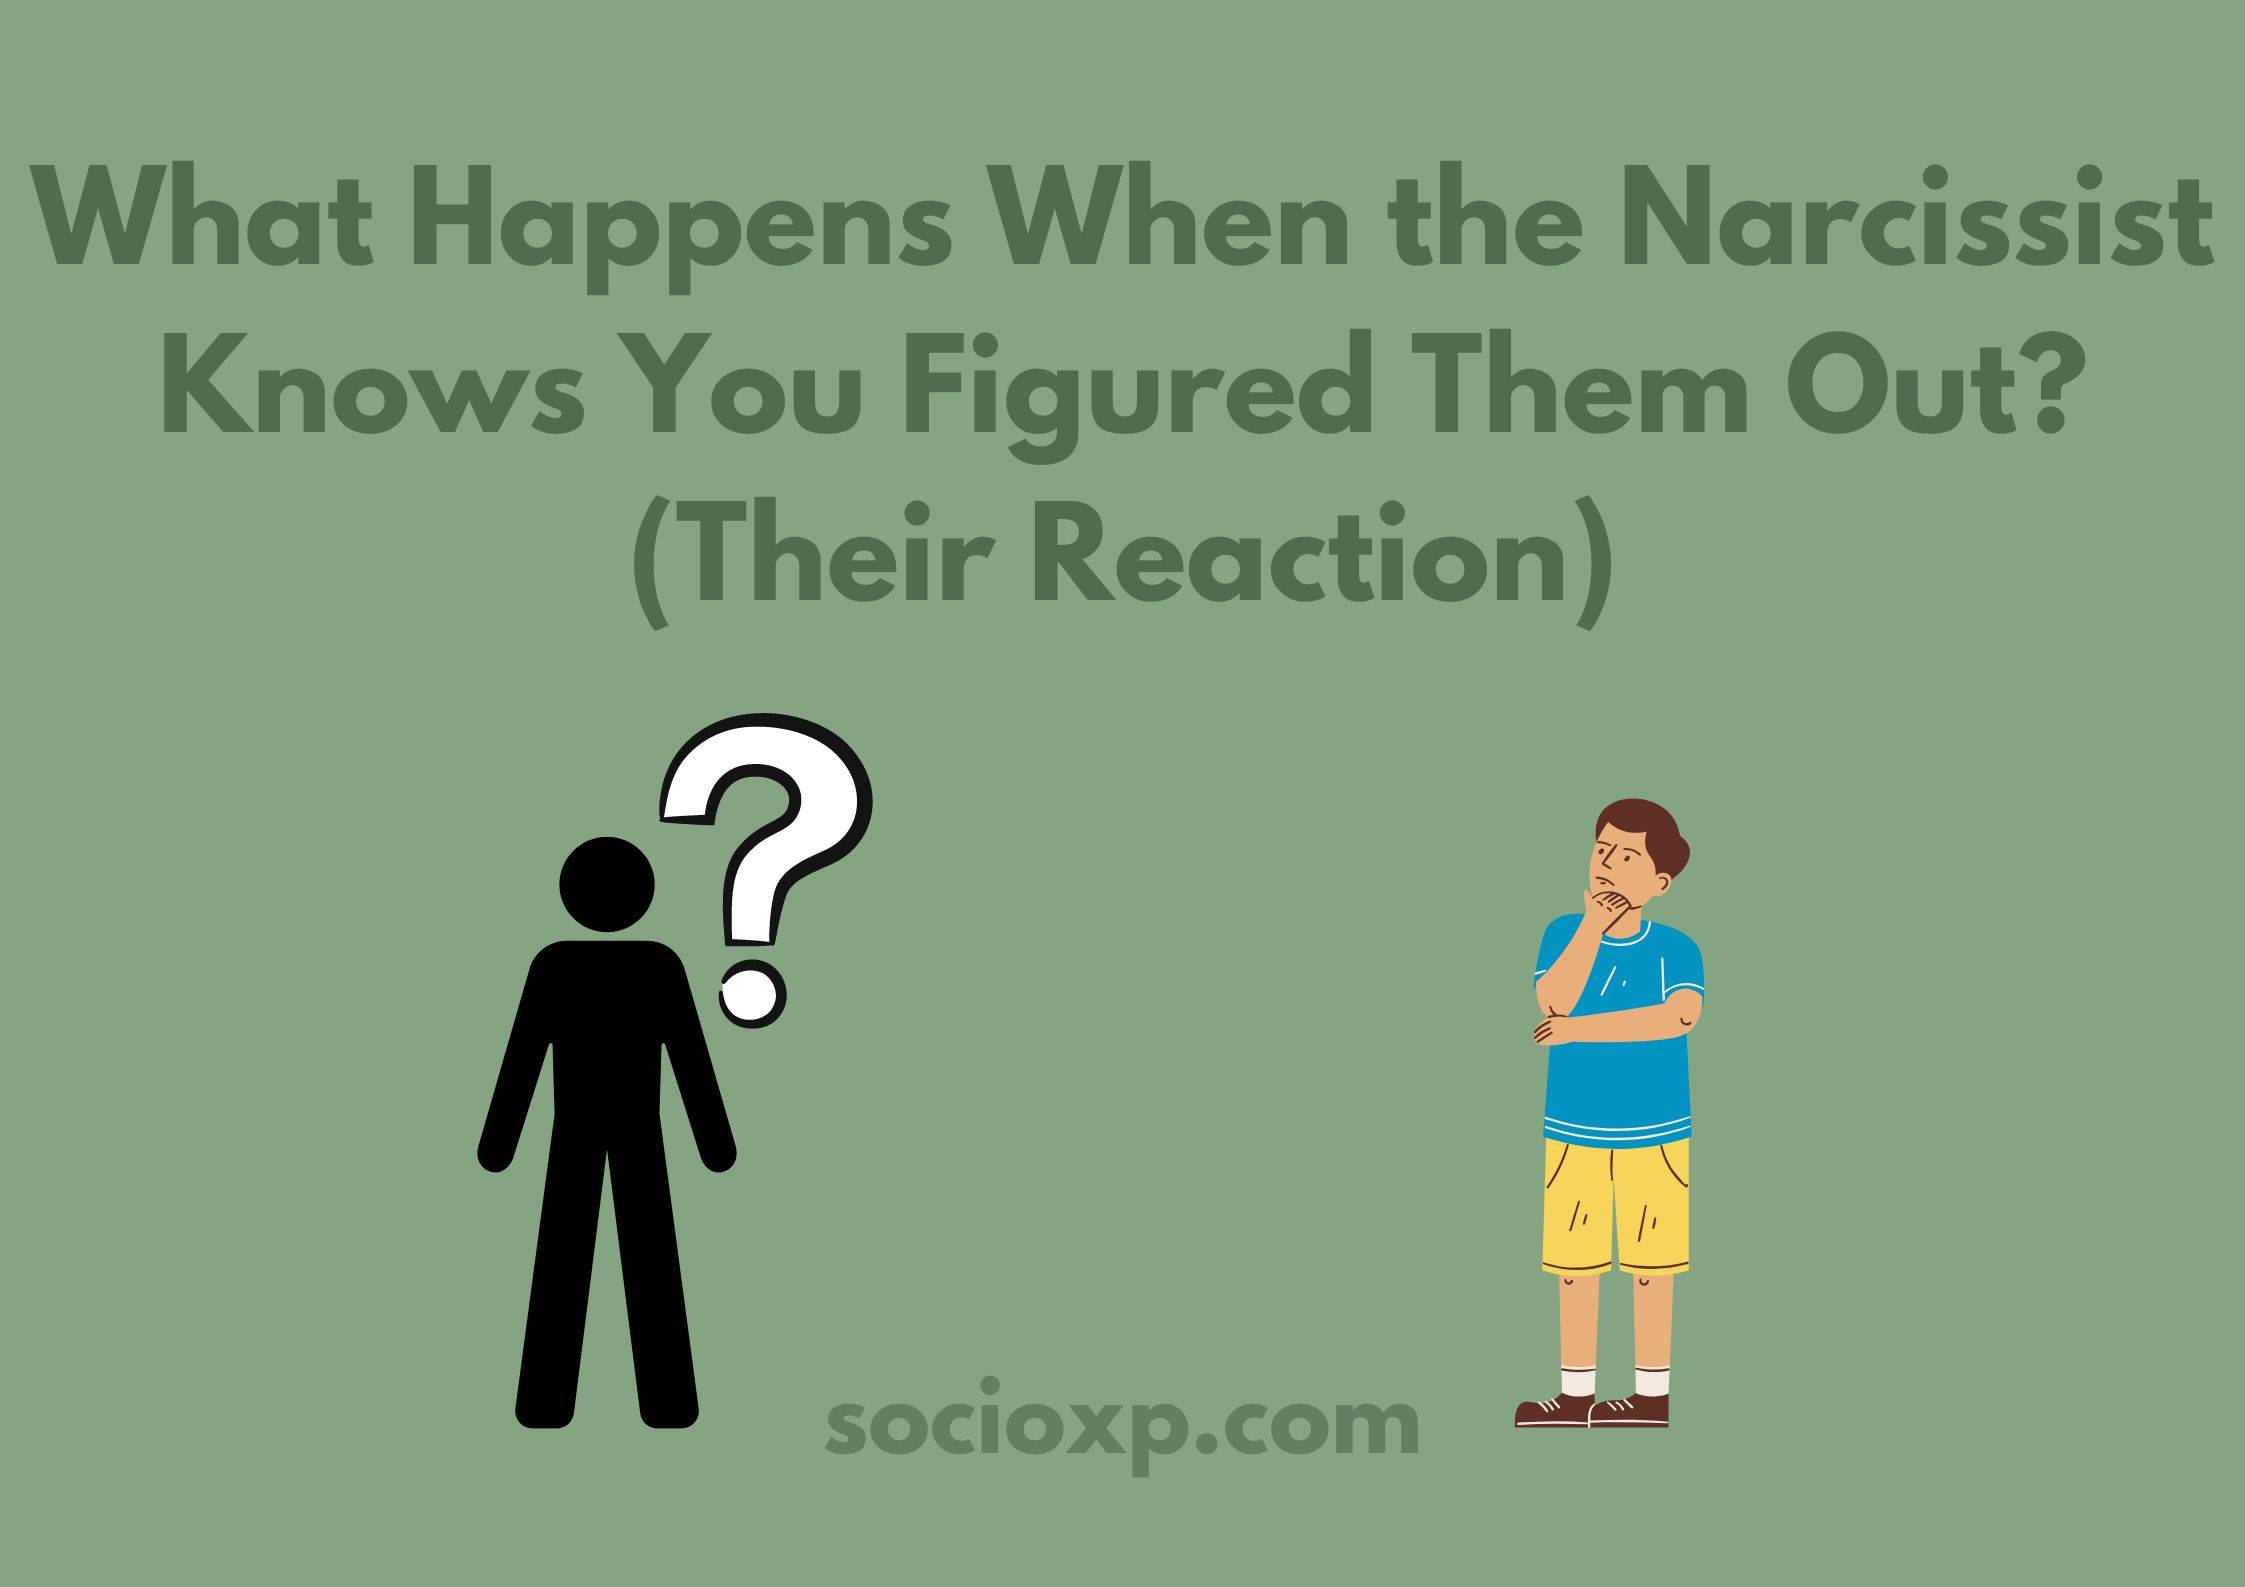 What Happens When the Narcissist Knows You Figured Them Out? (Their Reaction)